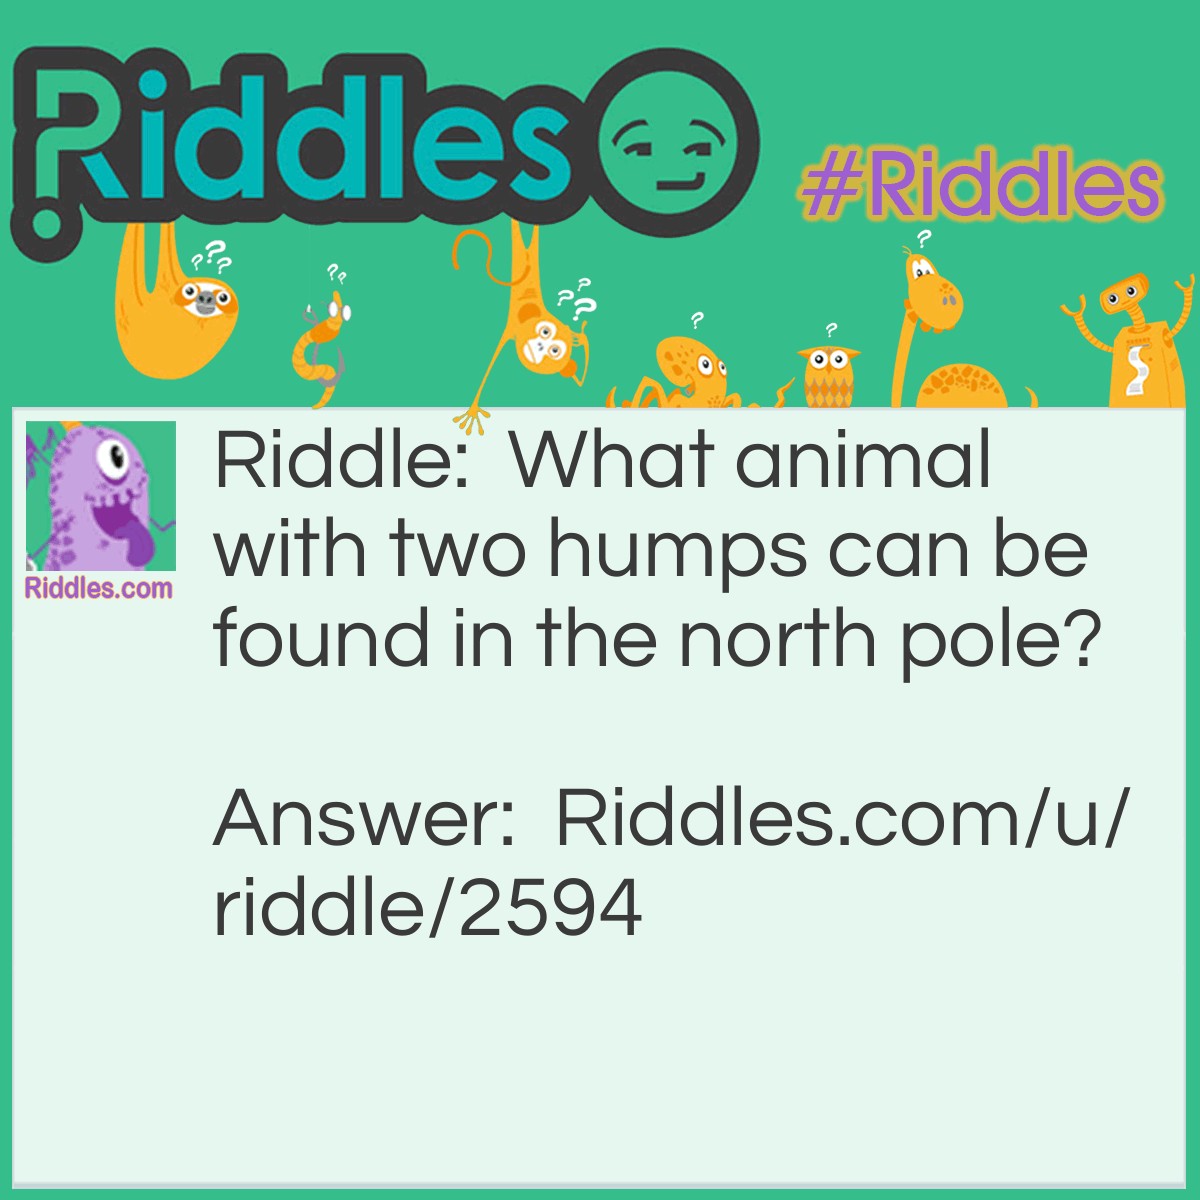 Riddle: What animal with two humps can be found in the north pole? Answer: A lost camel.